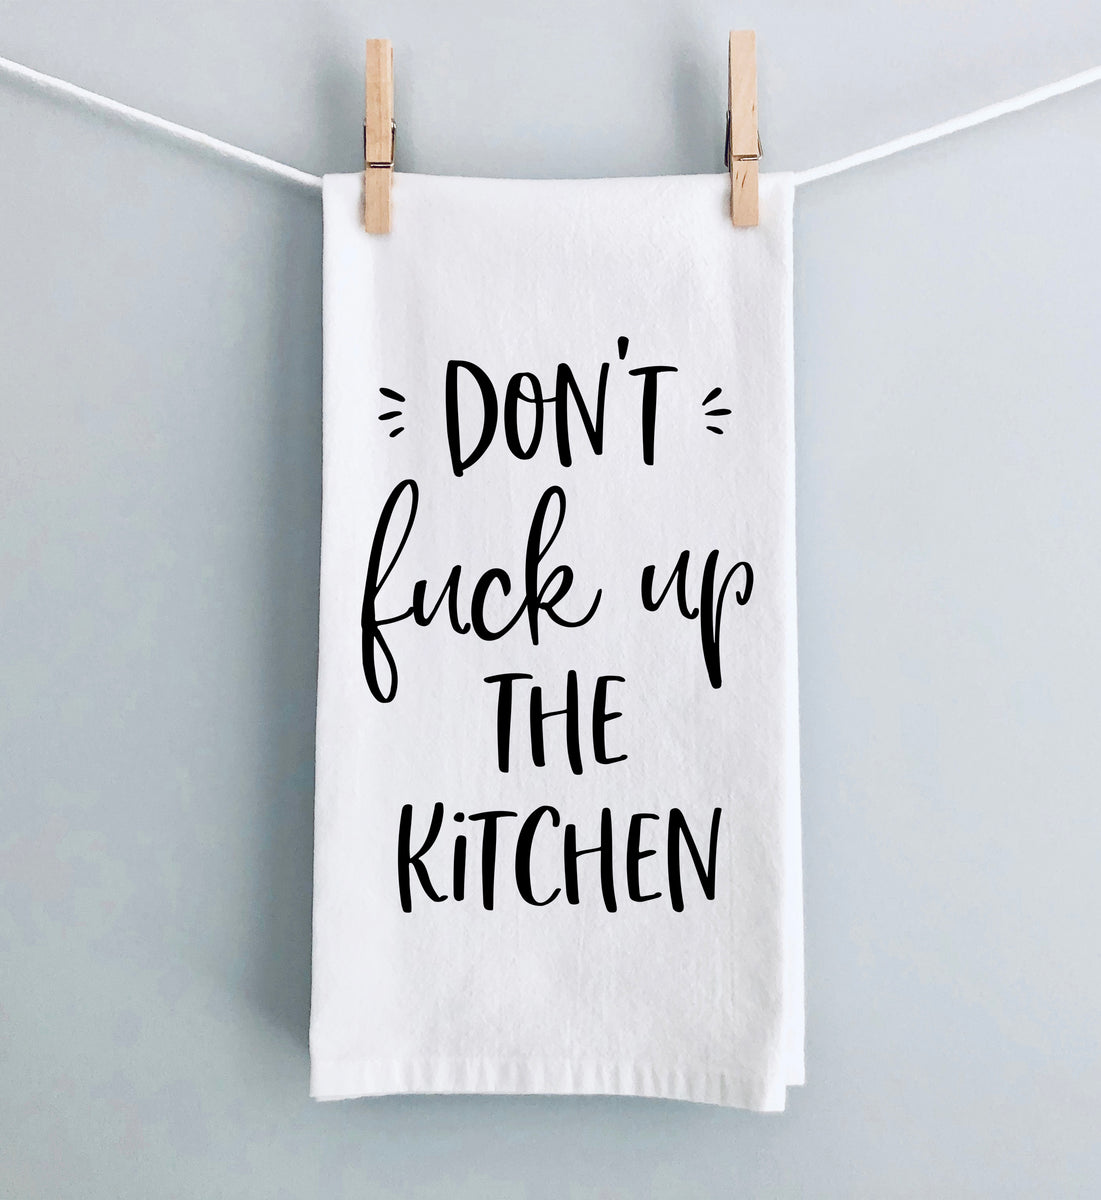 Fresh Out of Fucks - Funny Kitchen Towels Decorative Dish Towels